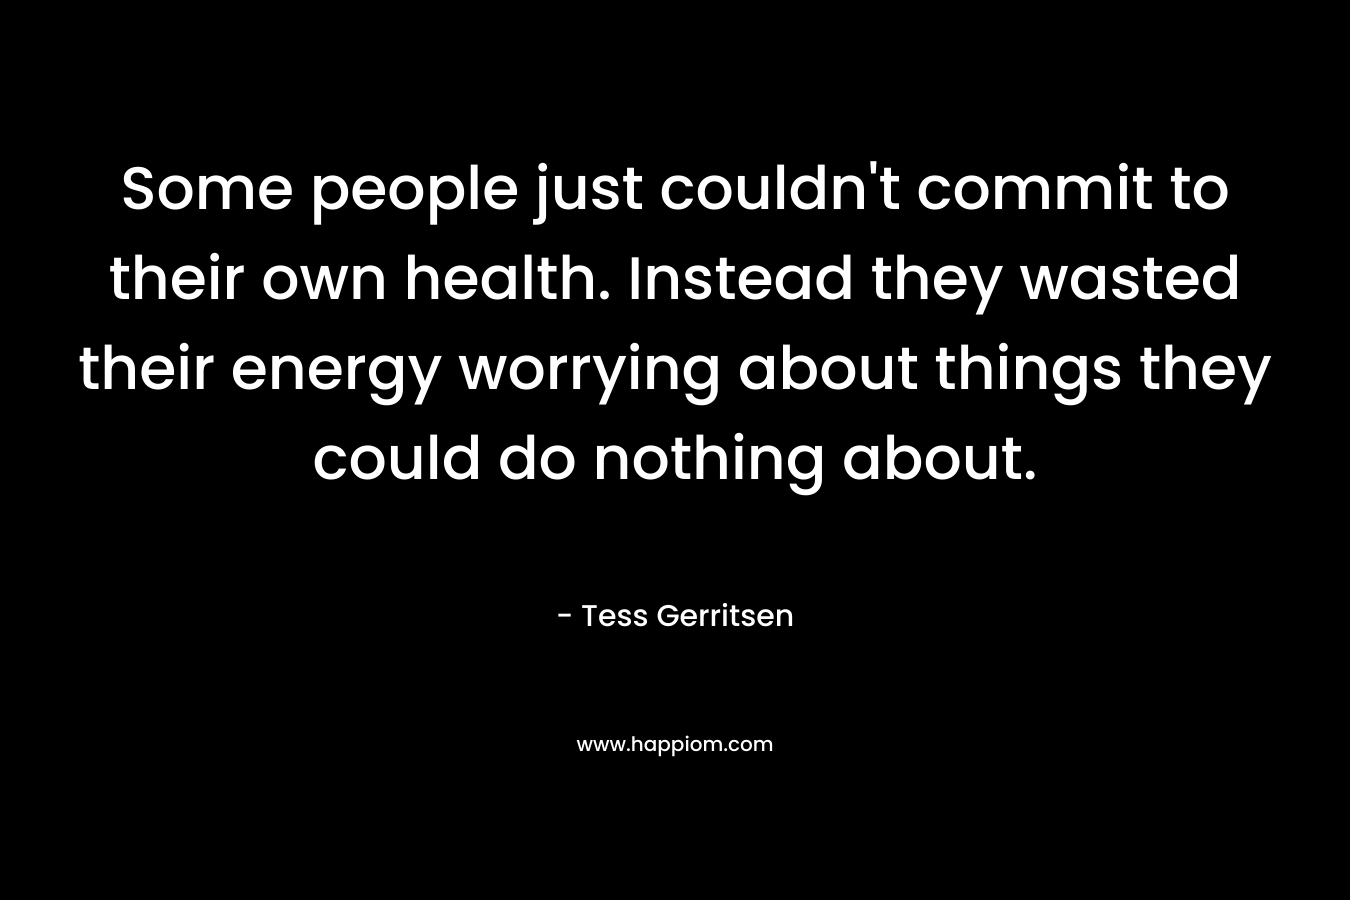 Some people just couldn't commit to their own health. Instead they wasted their energy worrying about things they could do nothing about.